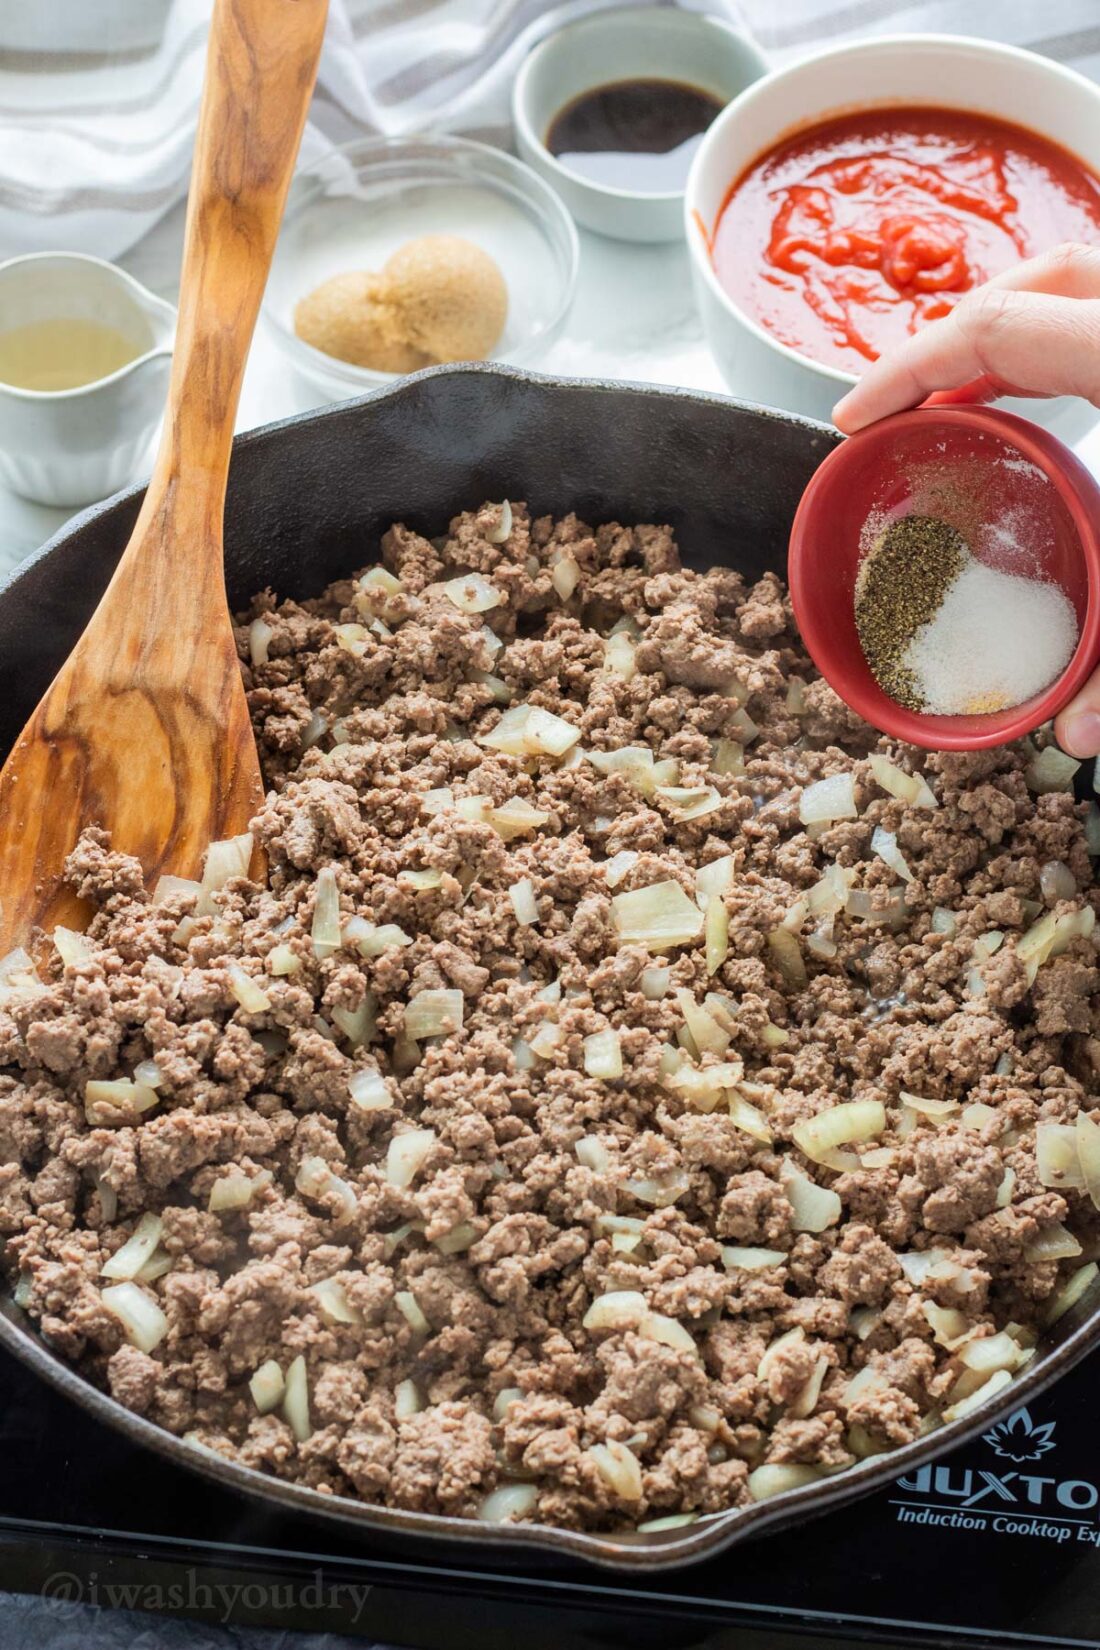 Pouring a red bowl of spice into a black frying pan of cooked ground beef. 